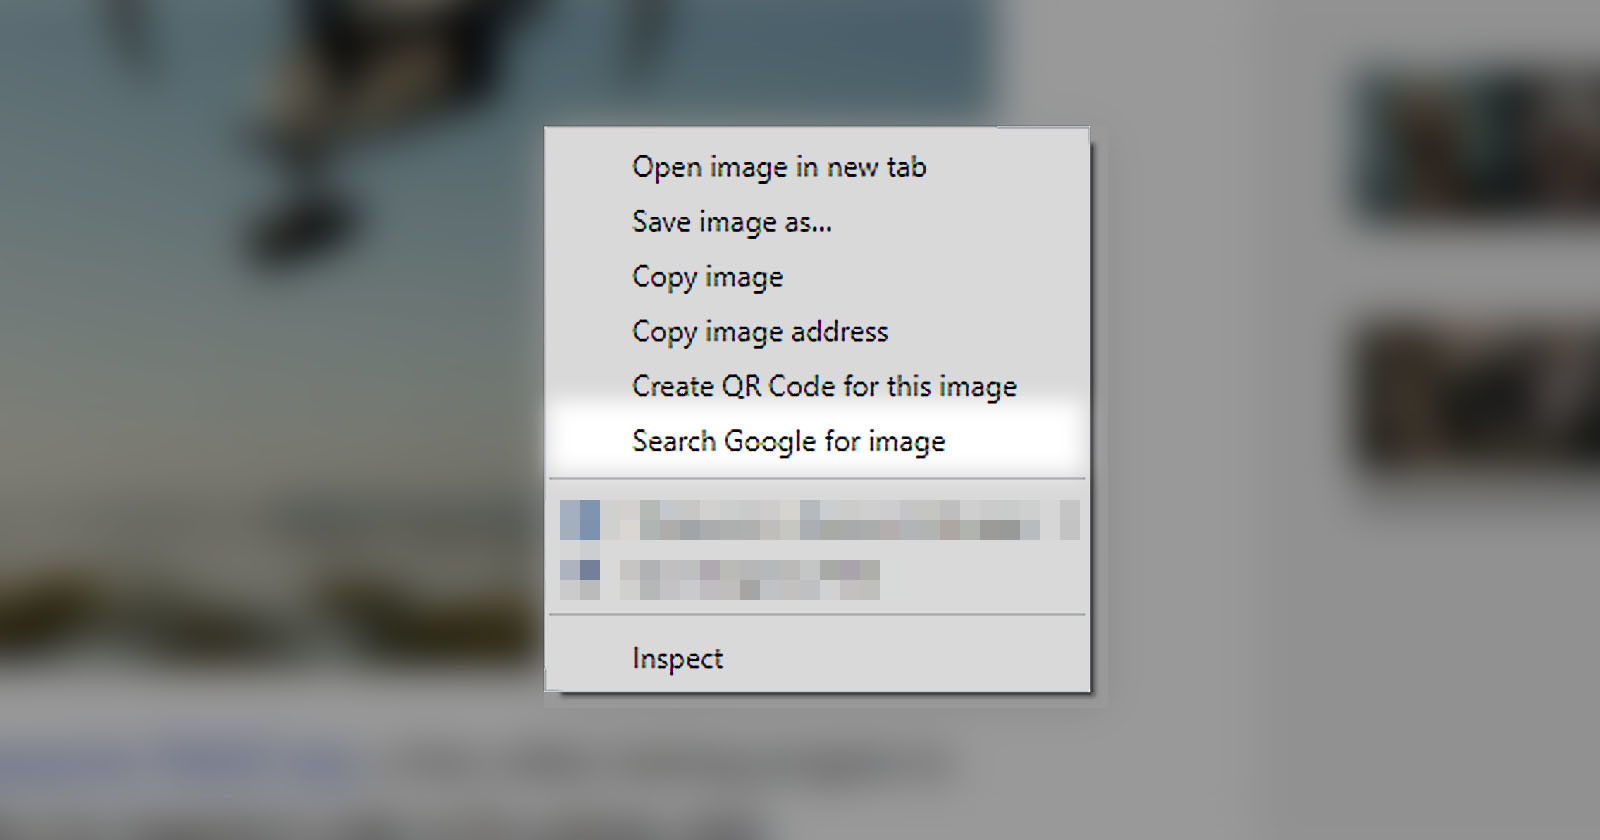 How to Restore Reverse Image Search with Right-Click in Chrome